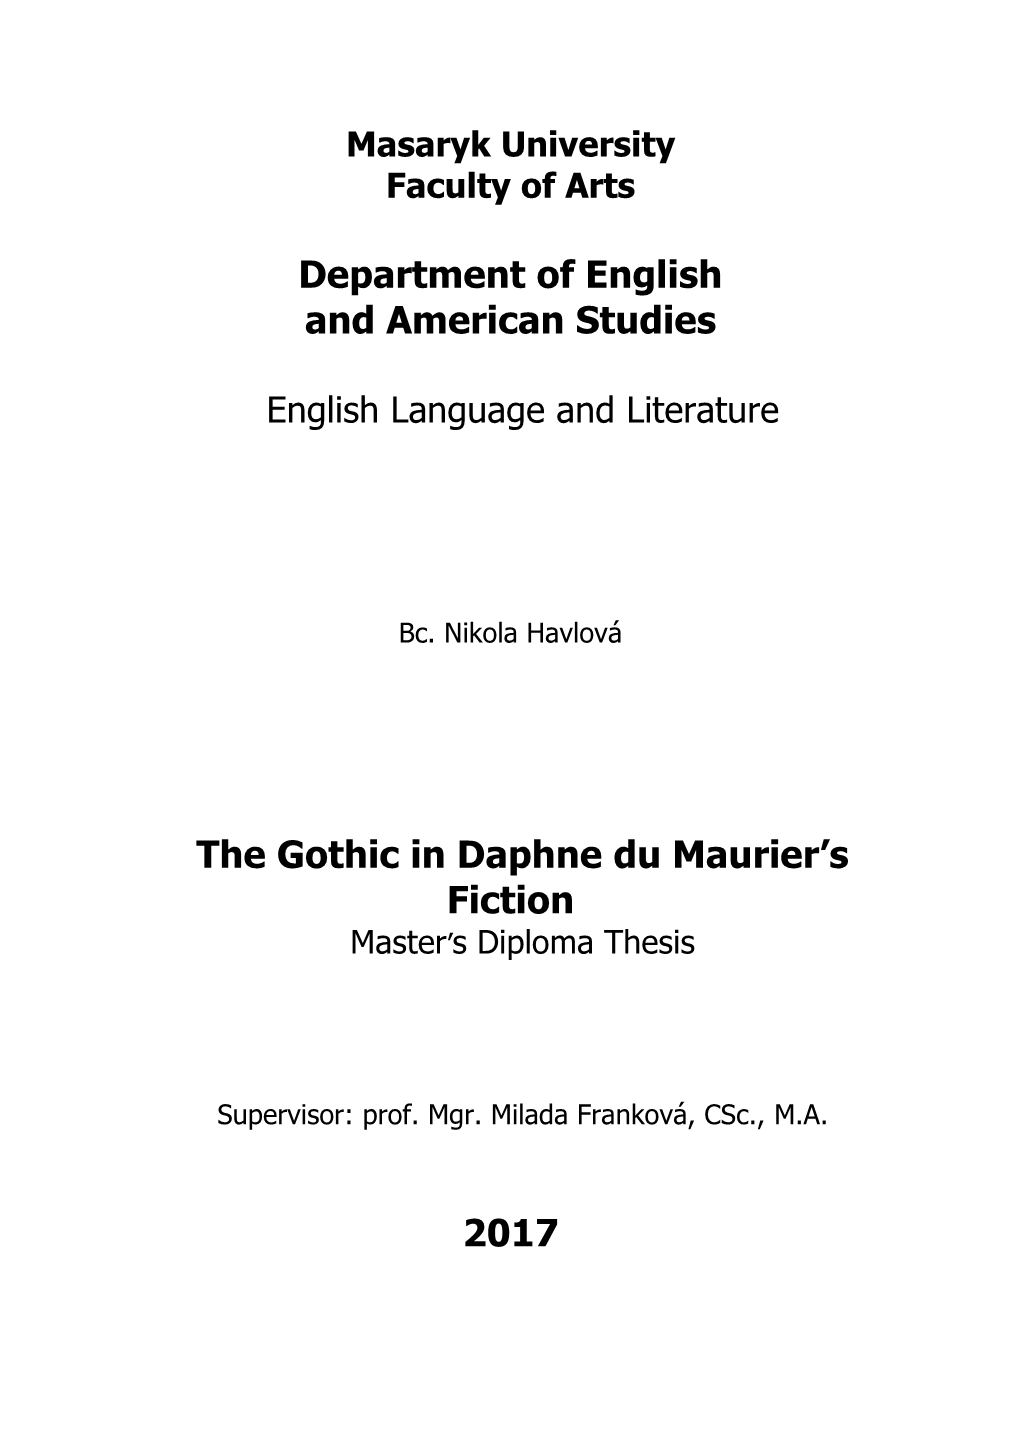 The Gothic in Daphne Du Maurier's Fiction